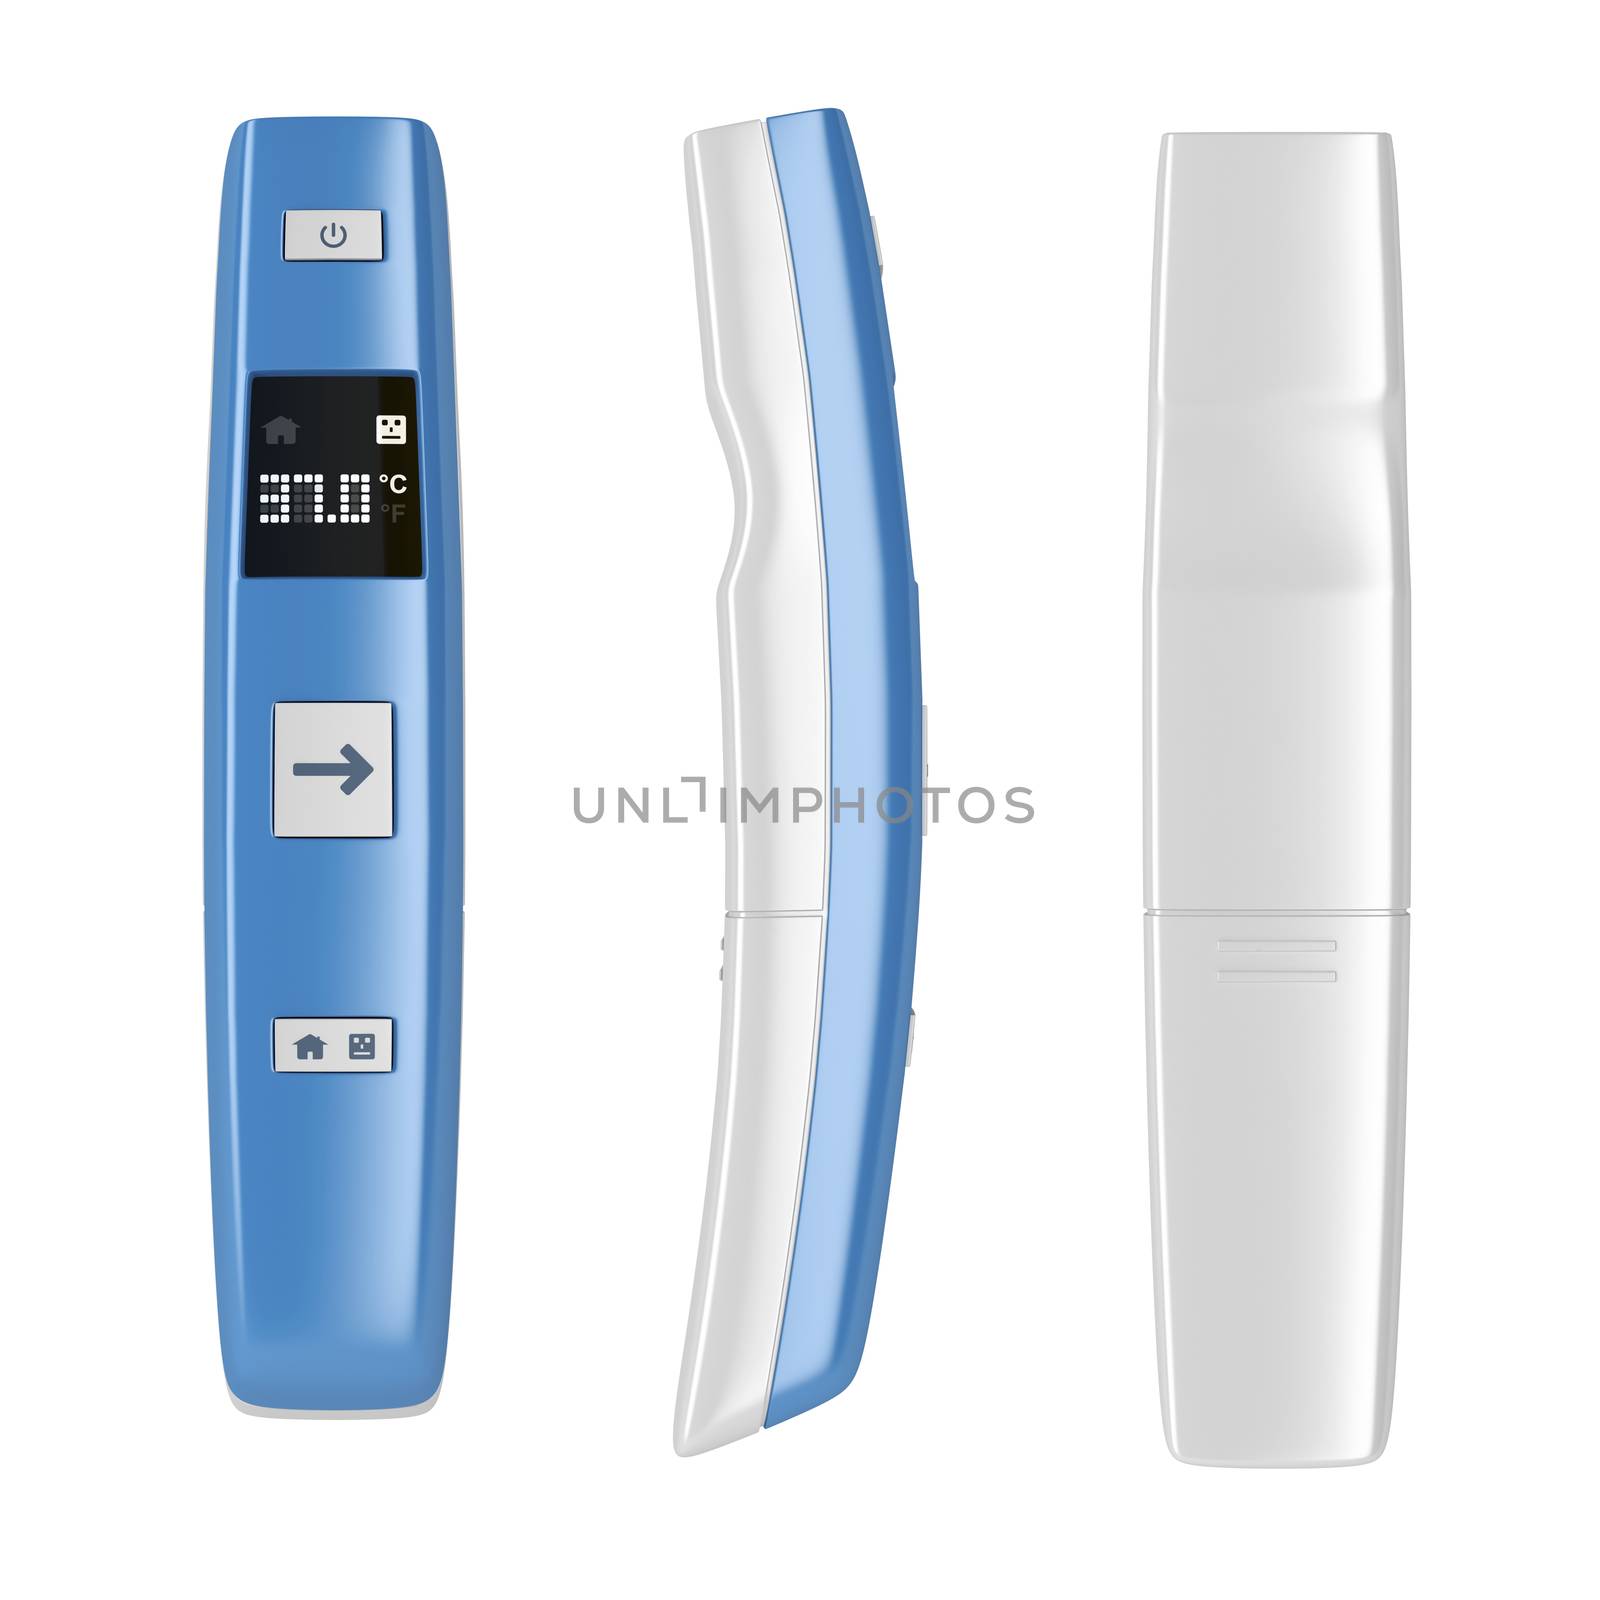 Non-contact medical thermometer, isolated on white background. Front, back and side view.